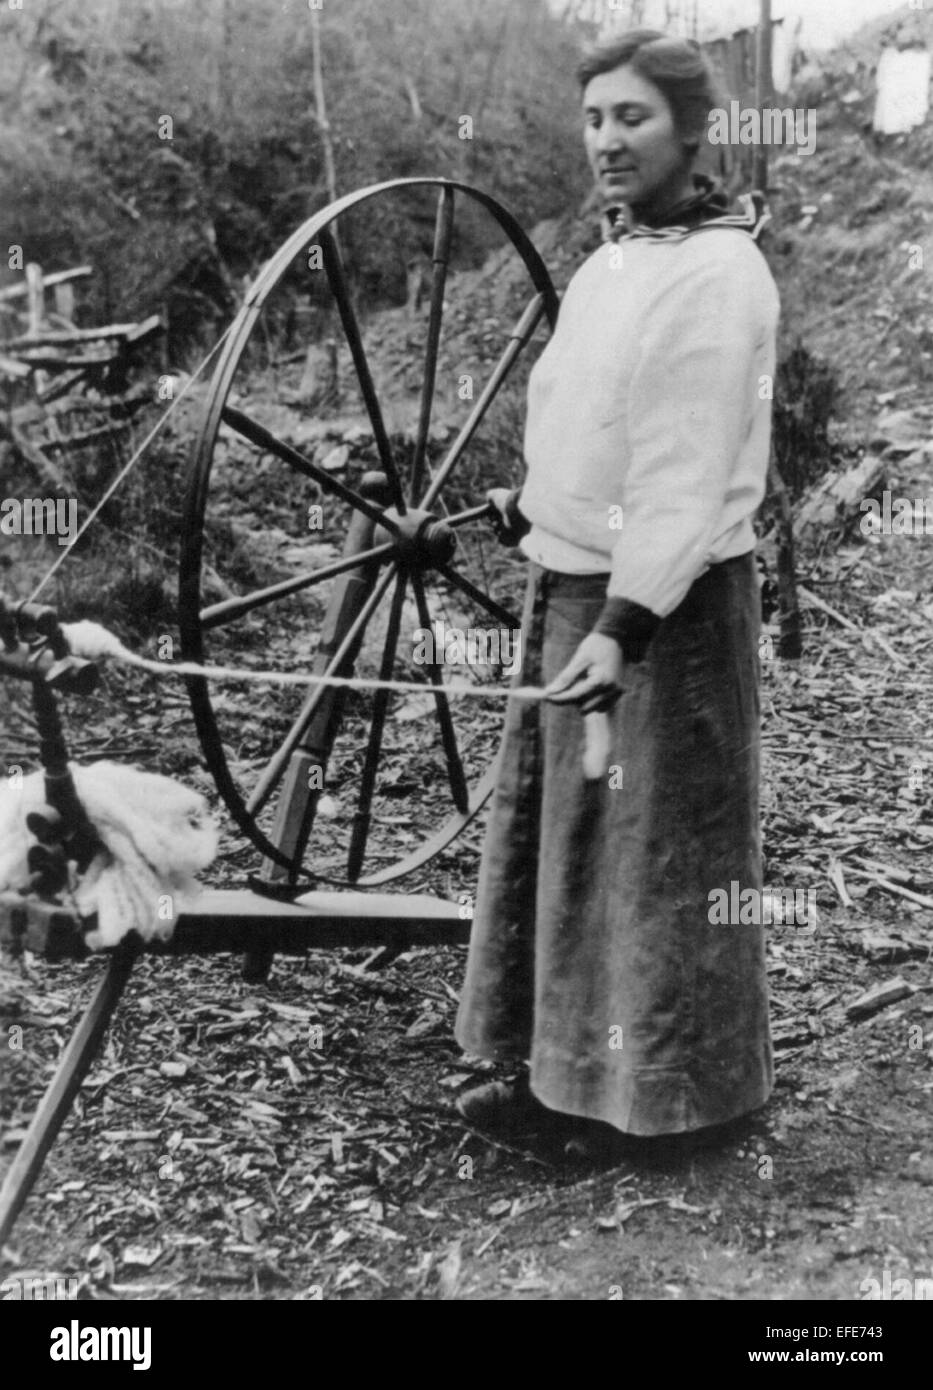 'Grandma's spinning wheel helps reduce high cost of living' Woman standing, outdoors, with spinning wheel, circa 1920 Stock Photo